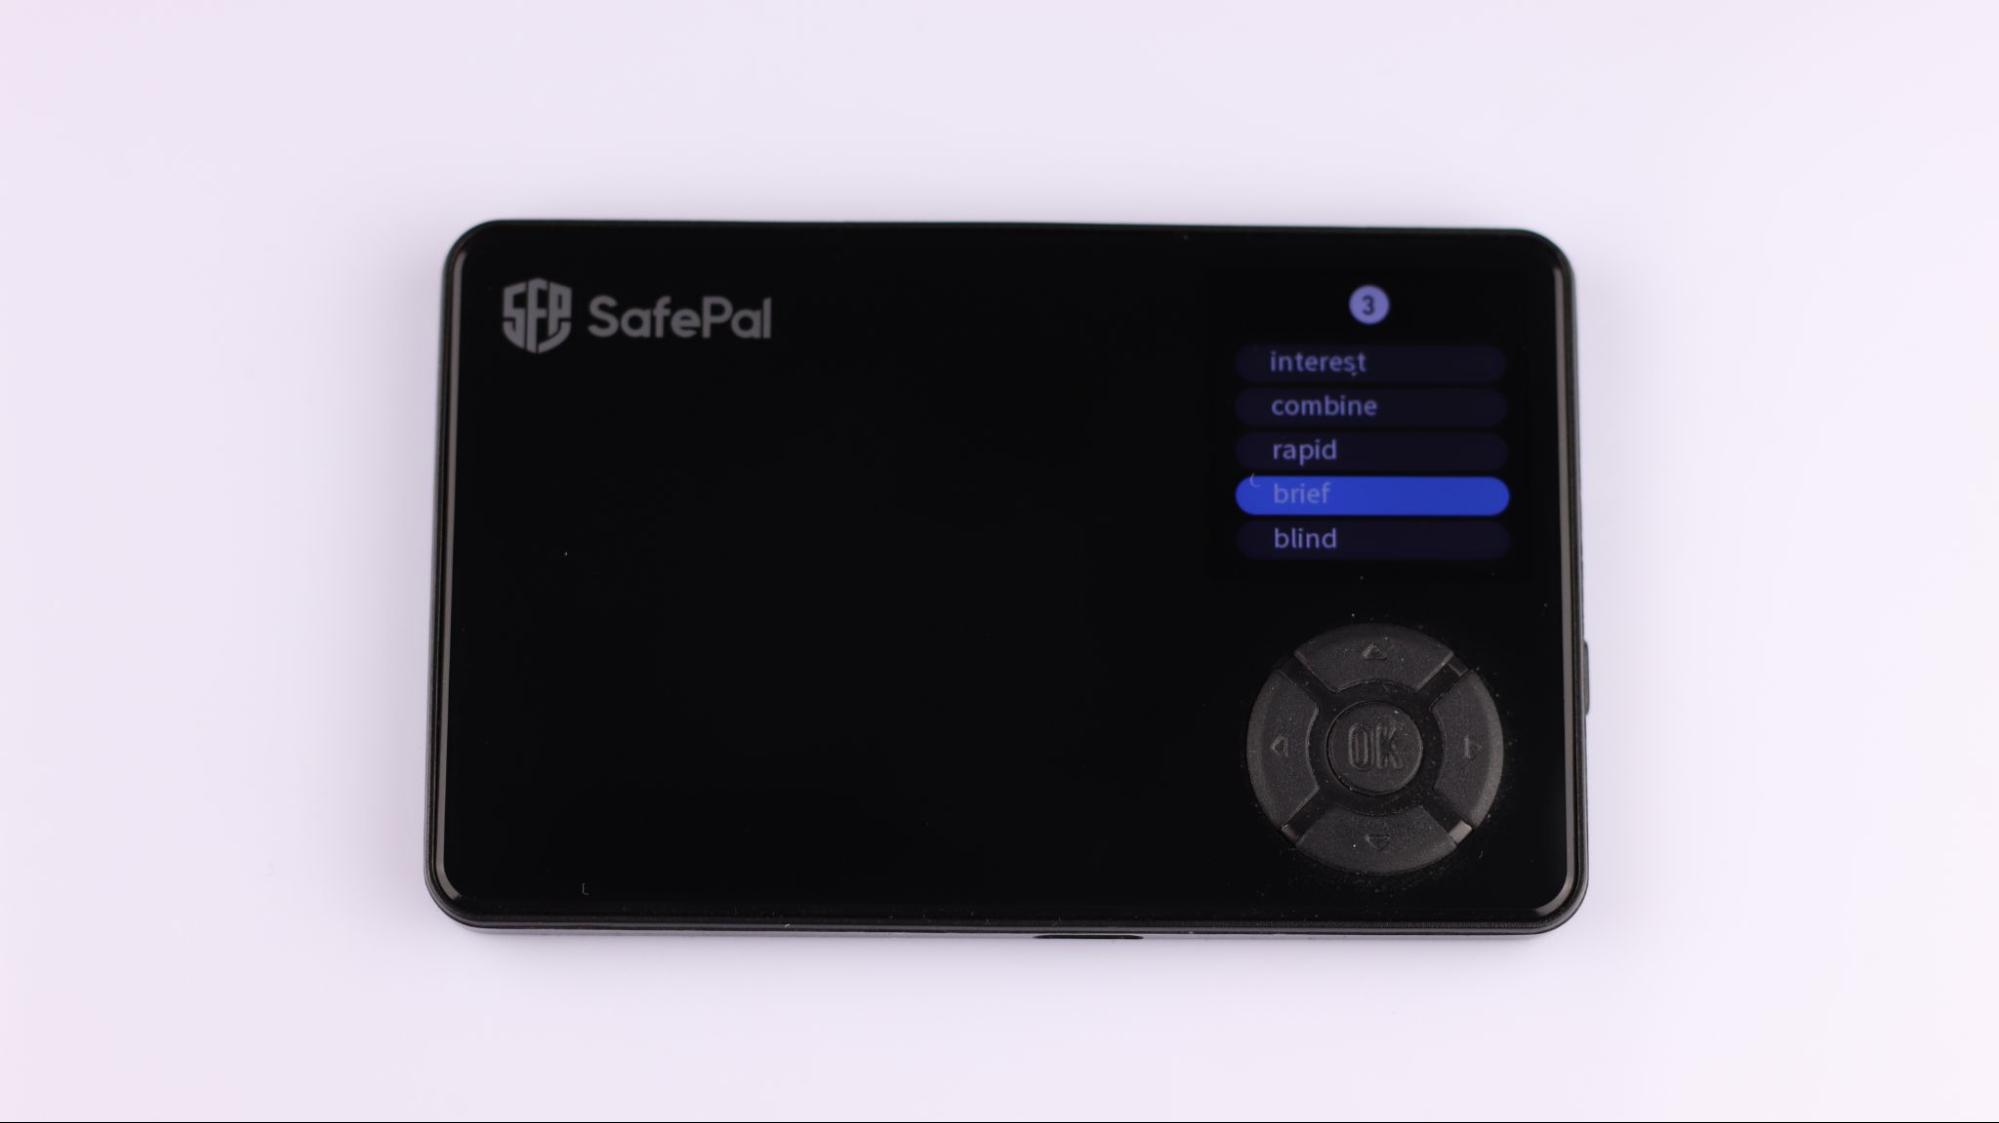 safepal-s1-review-22